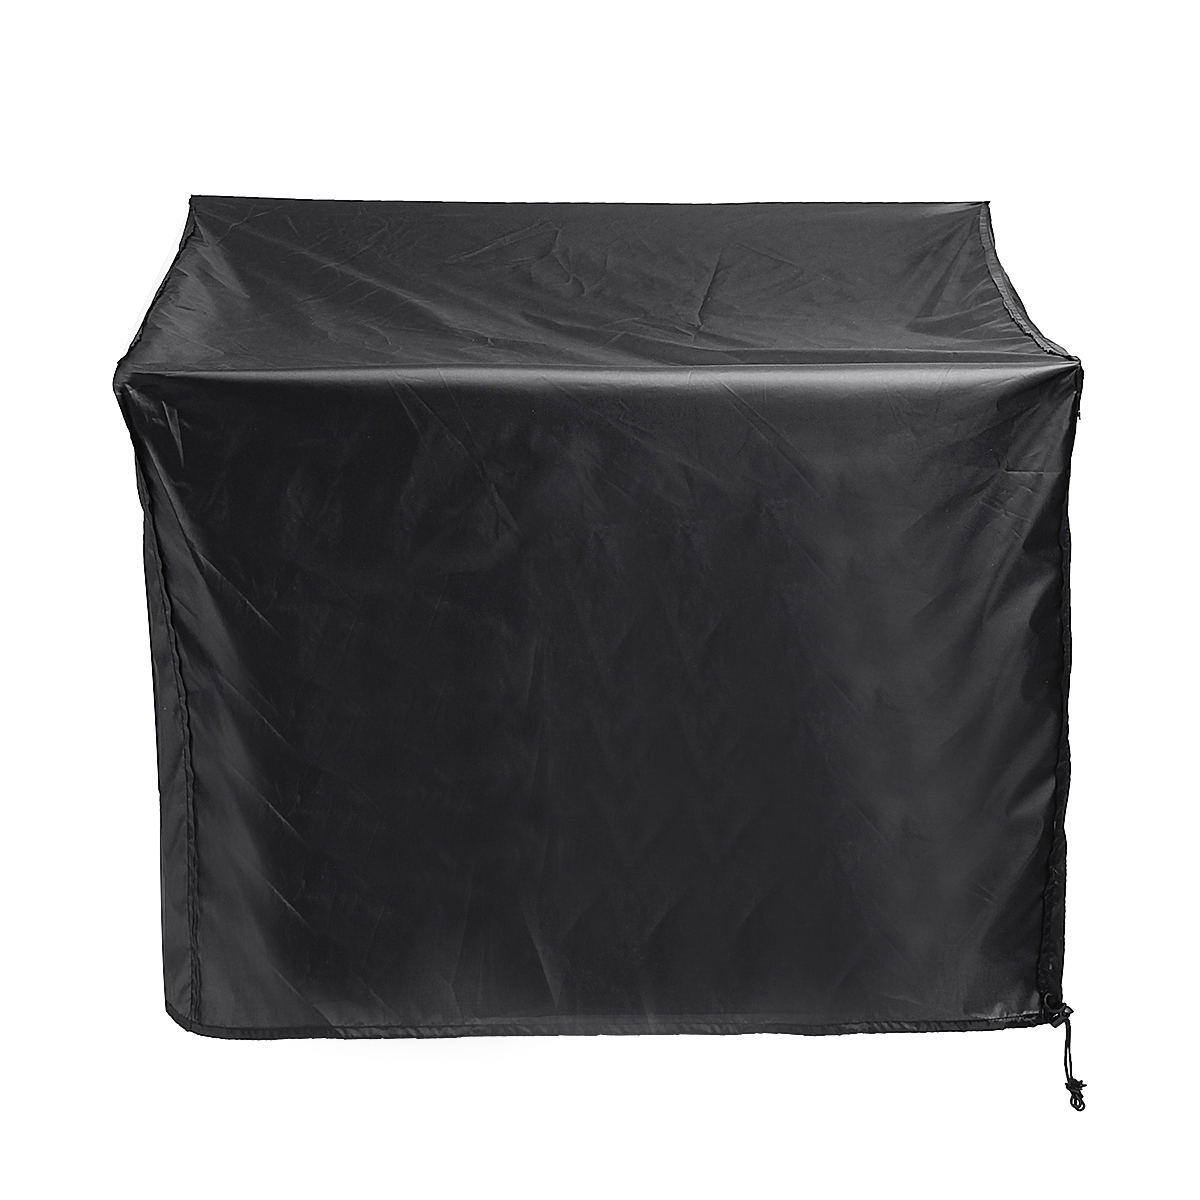 

Square Black Fire Pit Cover Outdoor Garden Dustproof Waterproof Cover Garden Table Furniture Cover